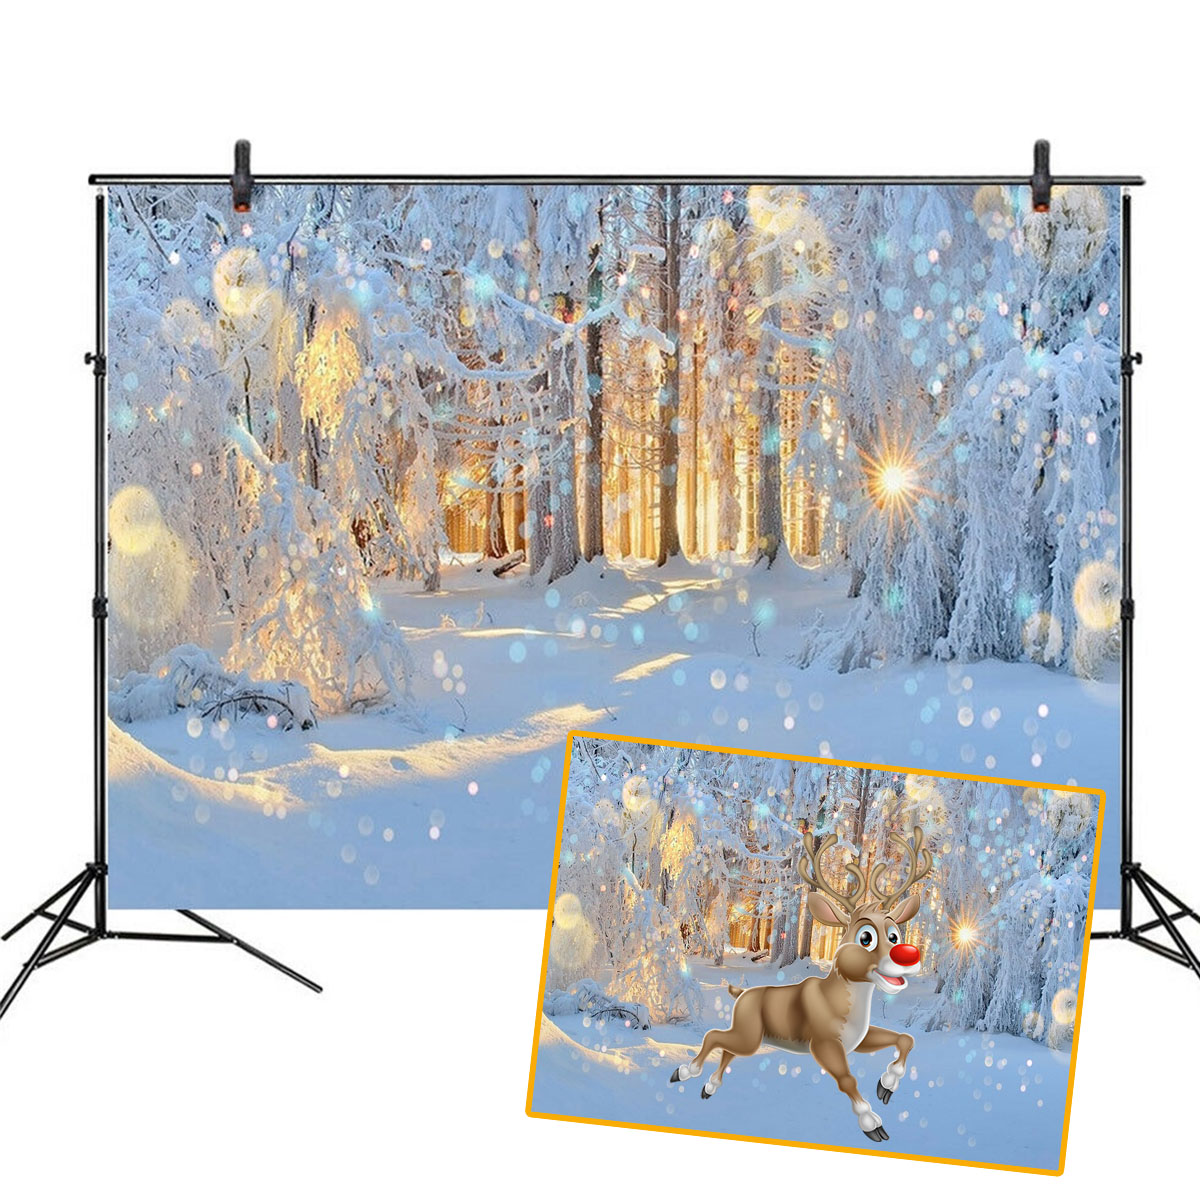 5x3FT-7x5FT-8x6FT-Winter-Snow-Light-Forest-Photography-Backdrop-Background-Studio-Prop-1609473-5